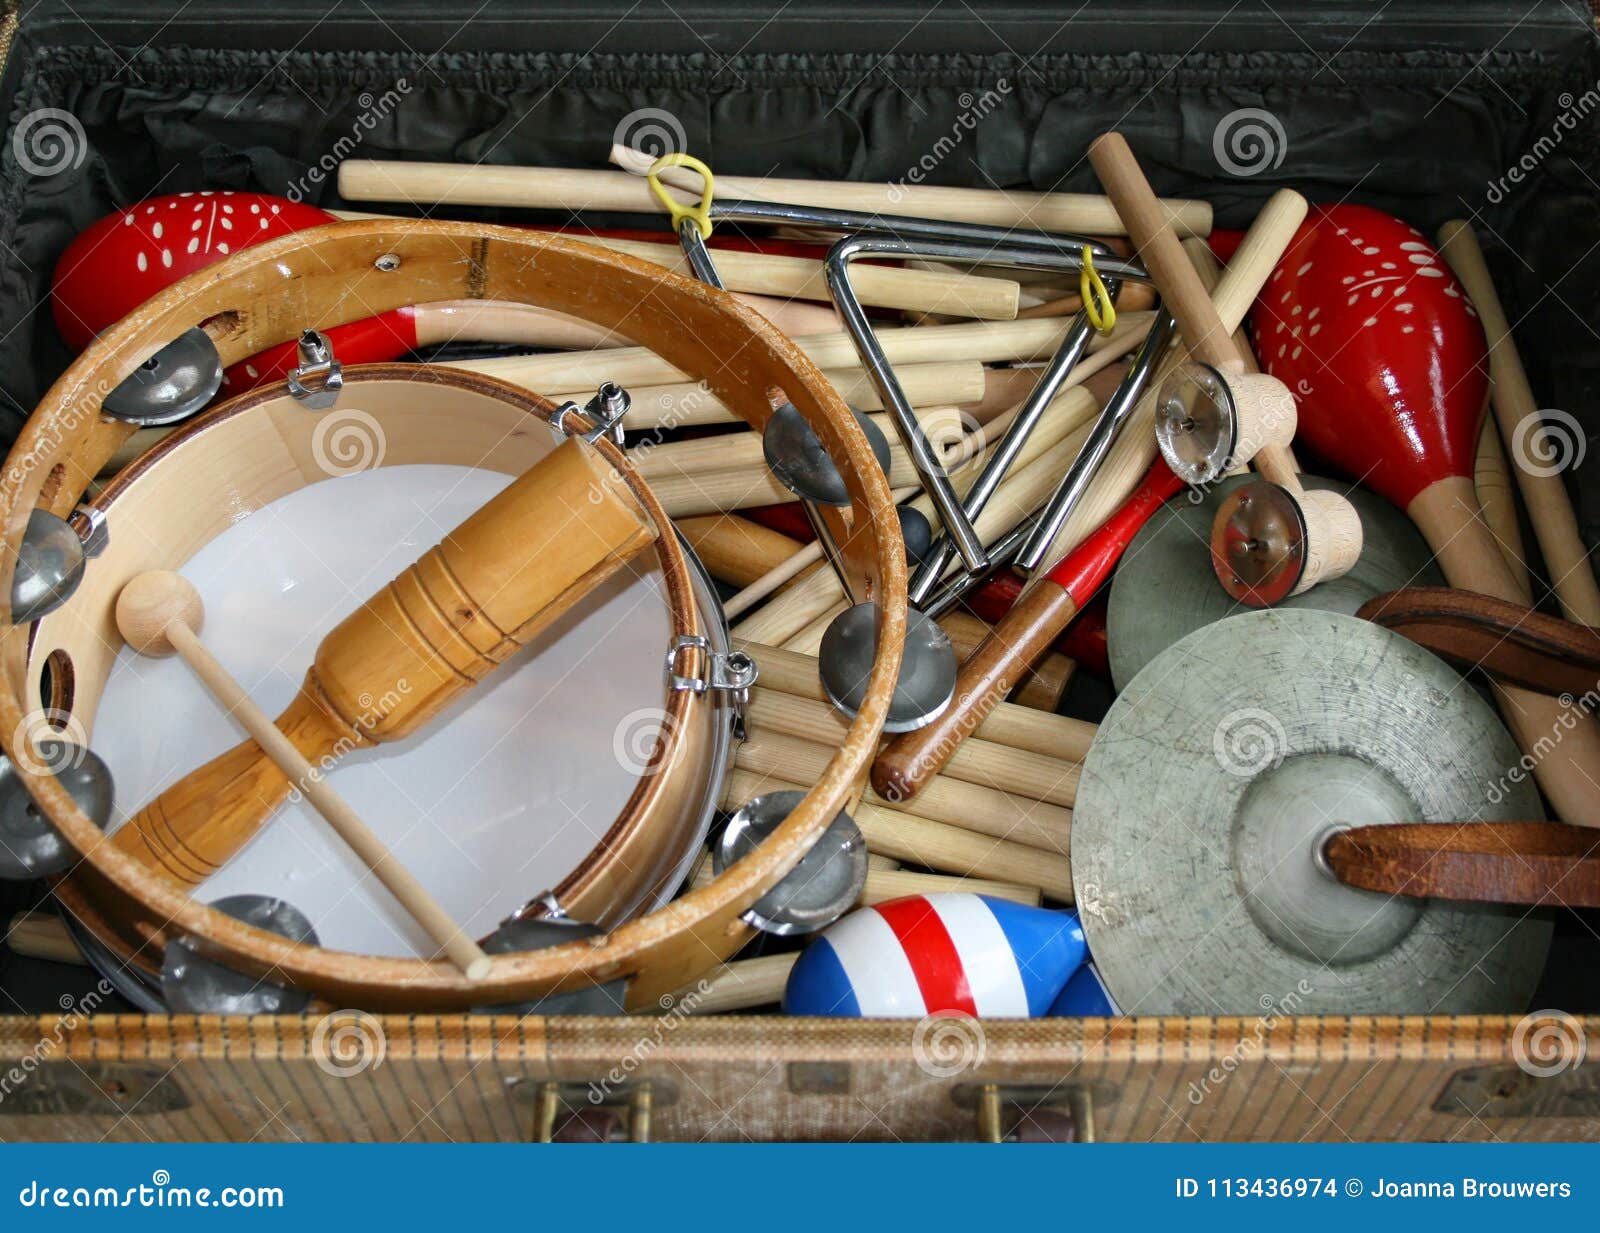 School Music Instruments in an Old Suitcase Stock Photo - Image of